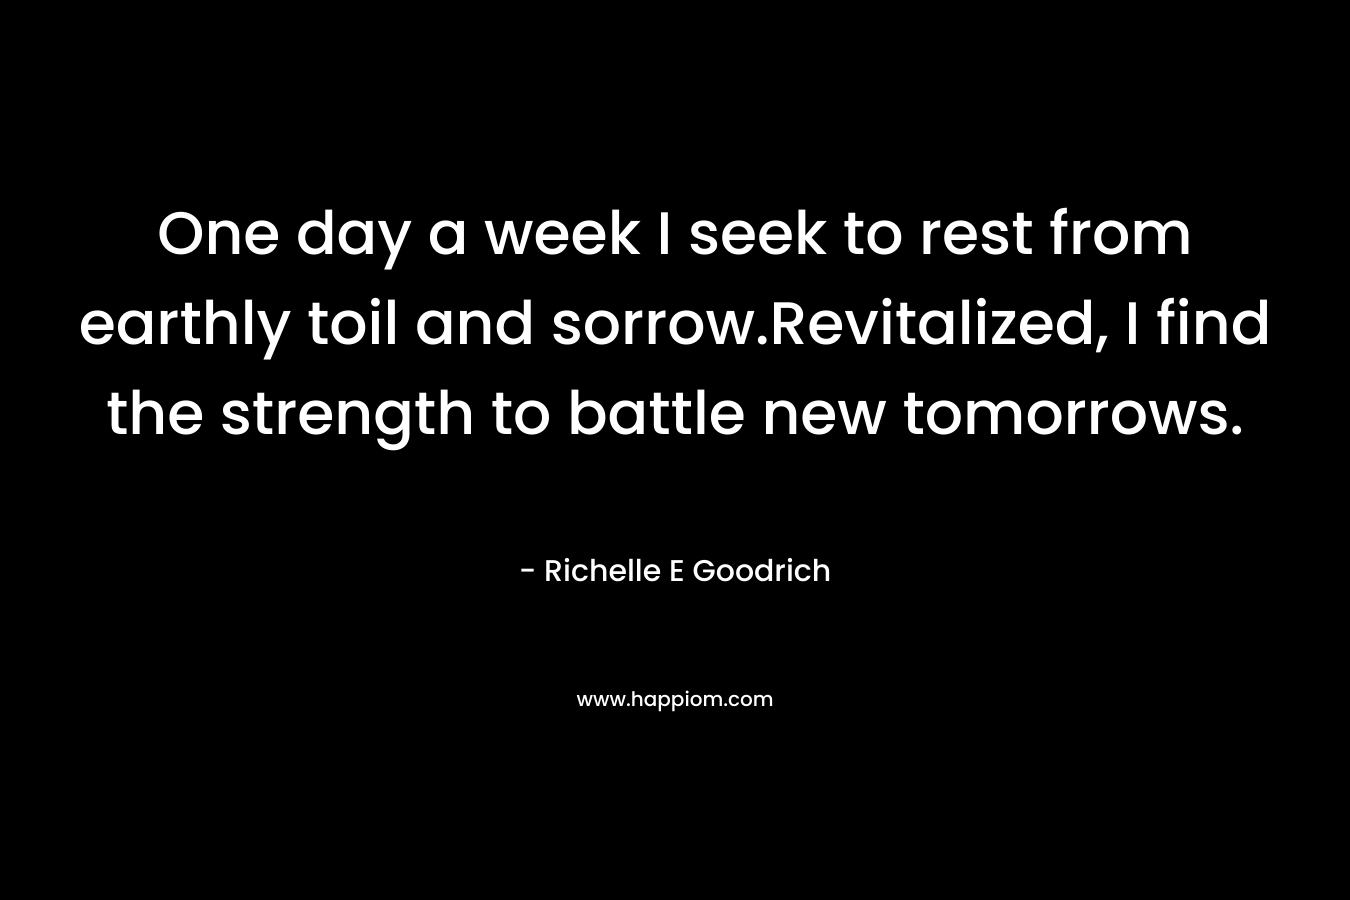 One day a week I seek to rest from earthly toil and sorrow.Revitalized, I find the strength to battle new tomorrows.